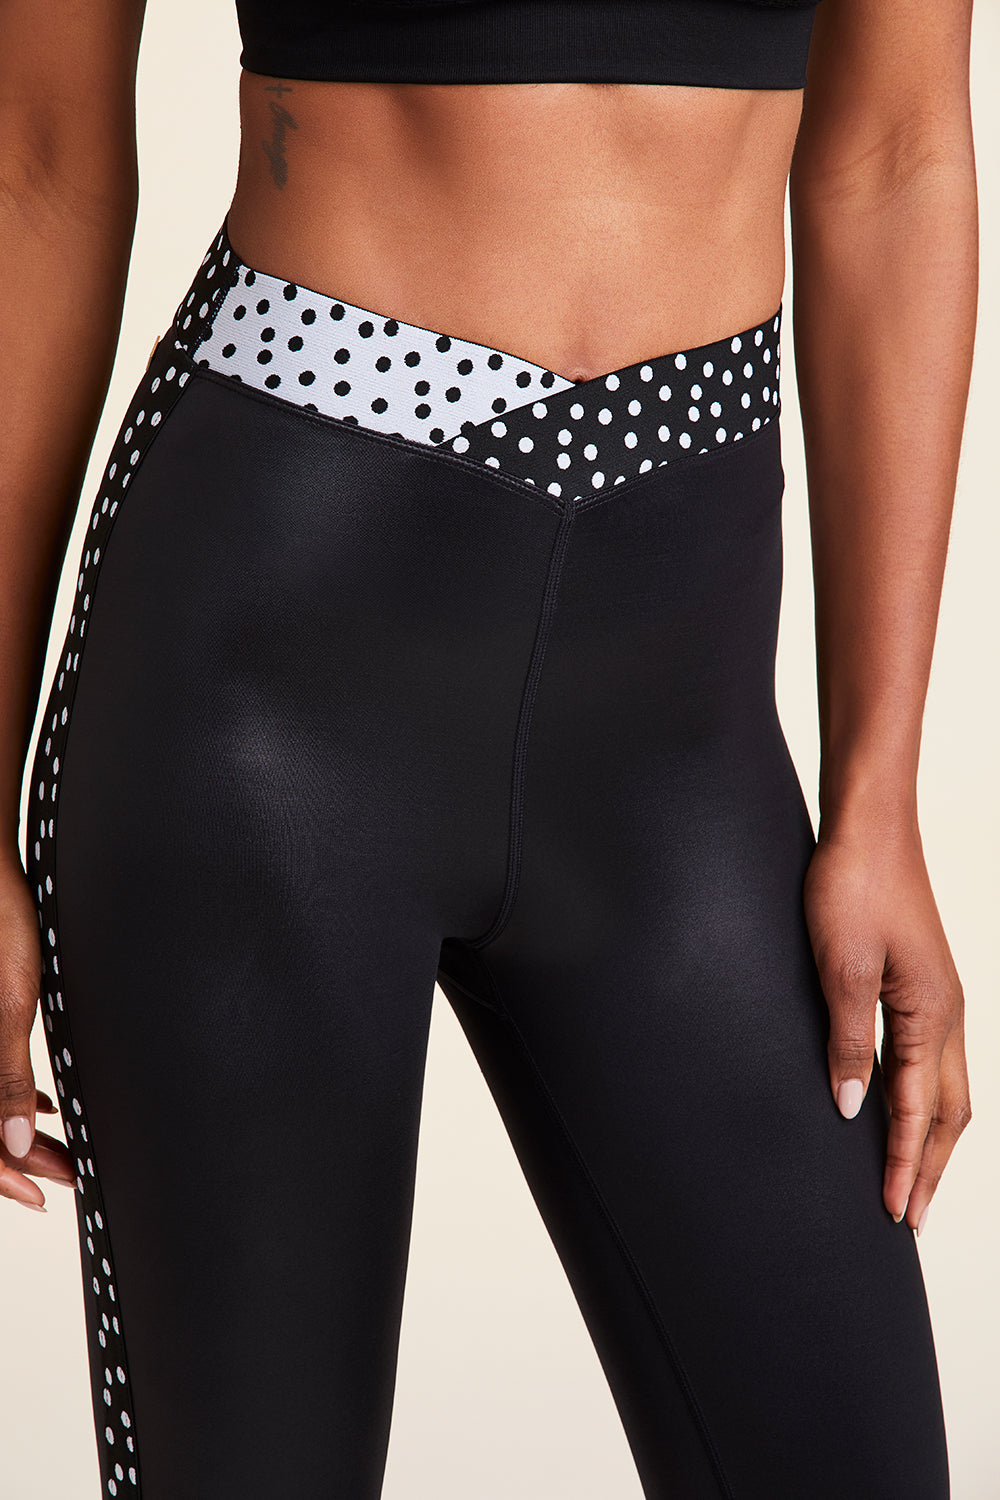 Front close-up view of Alala Women's Luxury Athleisure shiny black tight with black and white polda dot detail on waistband and side seams